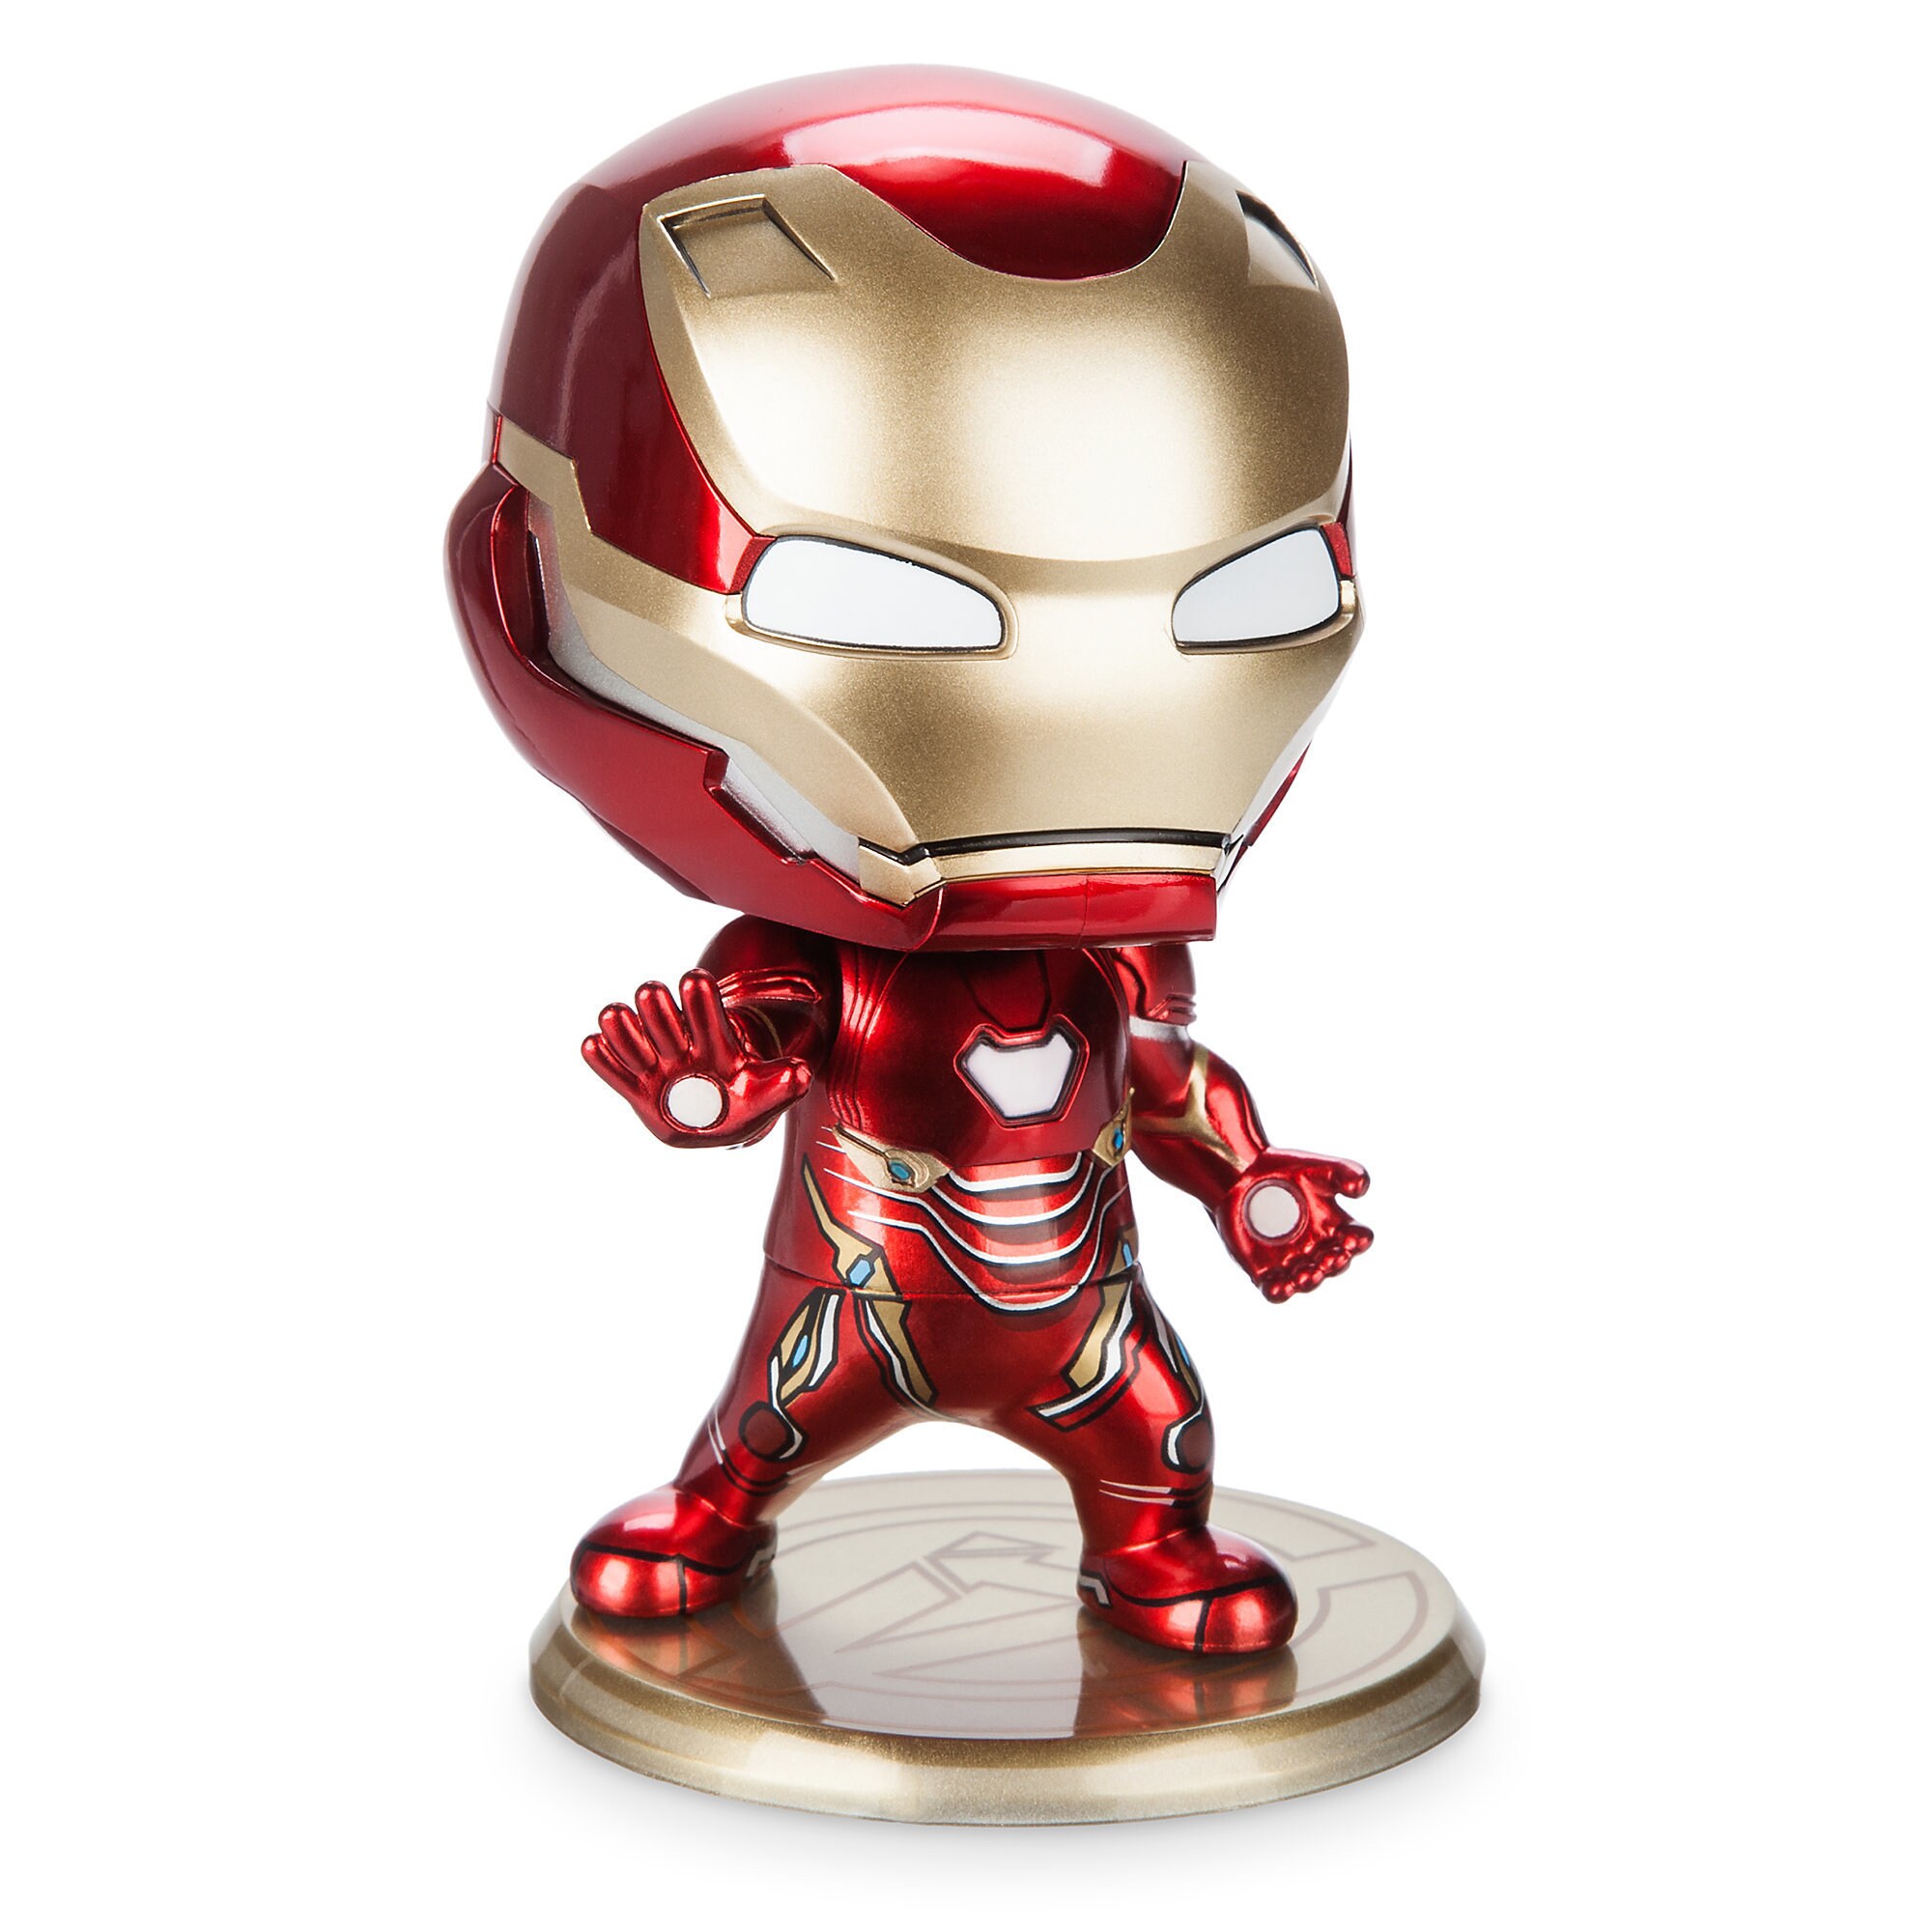 Product Image of Iron Man Cosbaby Bobble-Head Figure by Hot Toys - Marvel's Avengers: Infinity War # 1